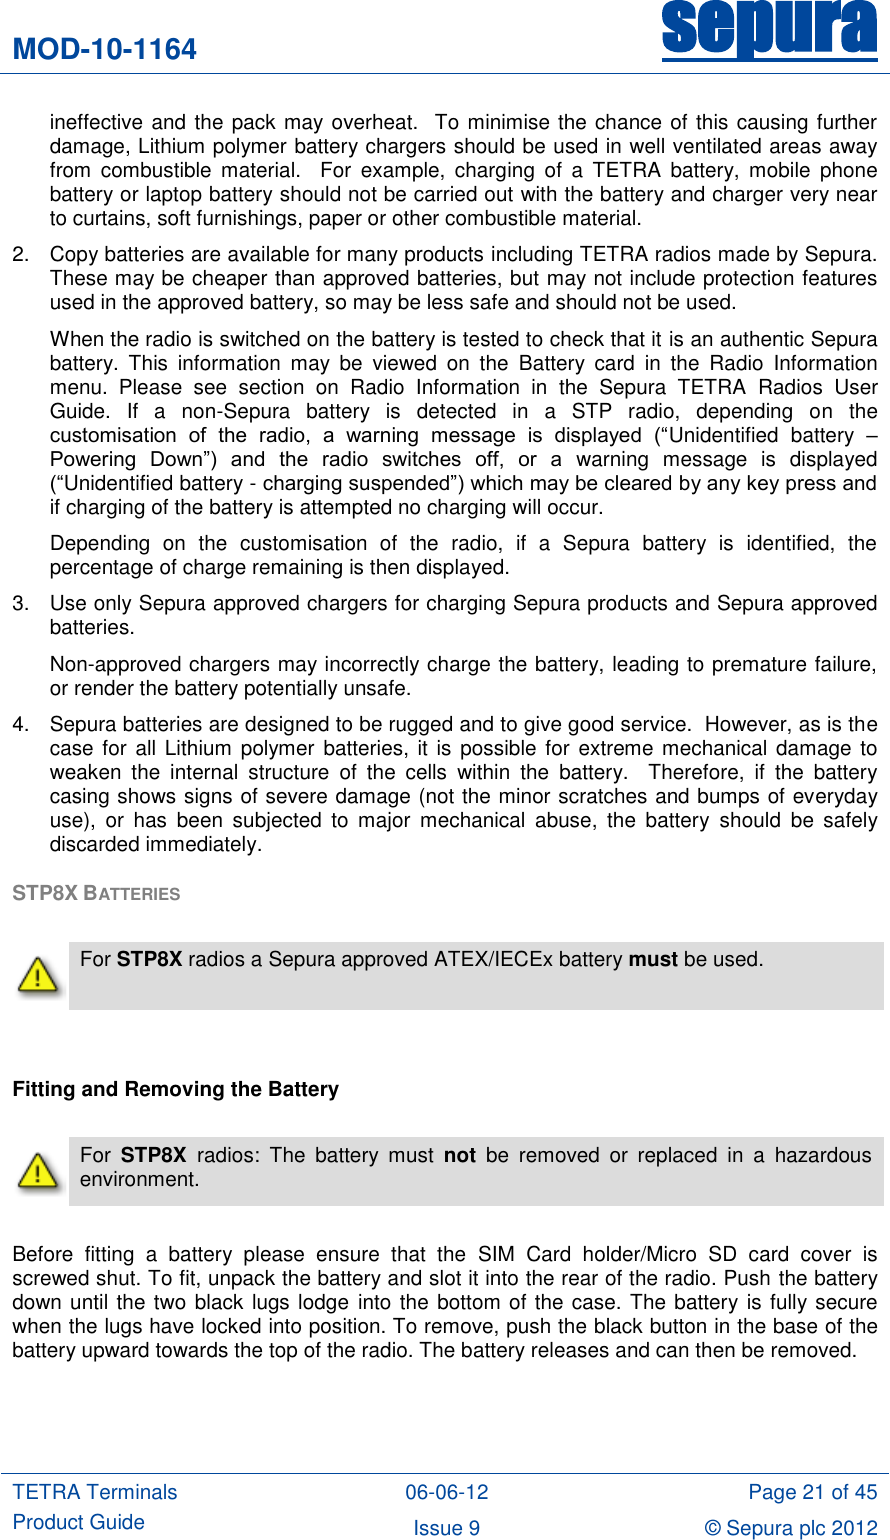 MOD-10-1164 sepura  TETRA Terminals Product Guide 06-06-12 Page 21 of 45 Issue 9 © Sepura plc 2012   ineffective and the pack may overheat.  To minimise the chance of this causing further damage, Lithium polymer battery chargers should be used in well ventilated areas away from  combustible  material.    For  example,  charging  of  a  TETRA  battery,  mobile  phone battery or laptop battery should not be carried out with the battery and charger very near to curtains, soft furnishings, paper or other combustible material. 2.  Copy batteries are available for many products including TETRA radios made by Sepura.  These may be cheaper than approved batteries, but may not include protection features used in the approved battery, so may be less safe and should not be used.  When the radio is switched on the battery is tested to check that it is an authentic Sepura battery.  This  information  may  be  viewed  on  the  Battery  card  in  the  Radio  Information menu.  Please  see  section  on  Radio  Information  in  the  Sepura  TETRA  Radios  User Guide.  If  a  non-Sepura  battery  is  detected  in  a  STP  radio,  depending  on  the customisation  of  the  radio,  a  warning  message  is  displayed  (“Unidentified  battery  – Powering  Down”)  and  the  radio  switches  off,  or  a  warning  message  is  displayed (“Unidentified battery - charging suspended”) which may be cleared by any key press and if charging of the battery is attempted no charging will occur. Depending  on  the  customisation  of  the  radio,  if  a  Sepura  battery  is  identified,  the percentage of charge remaining is then displayed. 3.  Use only Sepura approved chargers for charging Sepura products and Sepura approved batteries.  Non-approved chargers may incorrectly charge the battery, leading to premature failure, or render the battery potentially unsafe.   4.  Sepura batteries are designed to be rugged and to give good service.  However, as is the case for  all Lithium polymer batteries, it is possible for  extreme mechanical damage to weaken  the  internal  structure  of  the  cells  within  the  battery.    Therefore,  if  the  battery casing shows signs of severe damage (not the minor scratches and bumps of everyday use),  or  has  been  subjected  to  major  mechanical  abuse,  the  battery  should  be  safely discarded immediately. STP8X BATTERIES    For STP8X radios a Sepura approved ATEX/IECEx battery must be used.   Fitting and Removing the Battery   For  STP8X  radios:  The  battery  must  not  be  removed  or  replaced  in  a  hazardous environment.  Before  fitting  a  battery  please  ensure  that  the  SIM  Card  holder/Micro  SD  card  cover  is screwed shut. To fit, unpack the battery and slot it into the rear of the radio. Push the battery down until the two black lugs lodge into the bottom of the case. The battery is fully secure when the lugs have locked into position. To remove, push the black button in the base of the battery upward towards the top of the radio. The battery releases and can then be removed.  